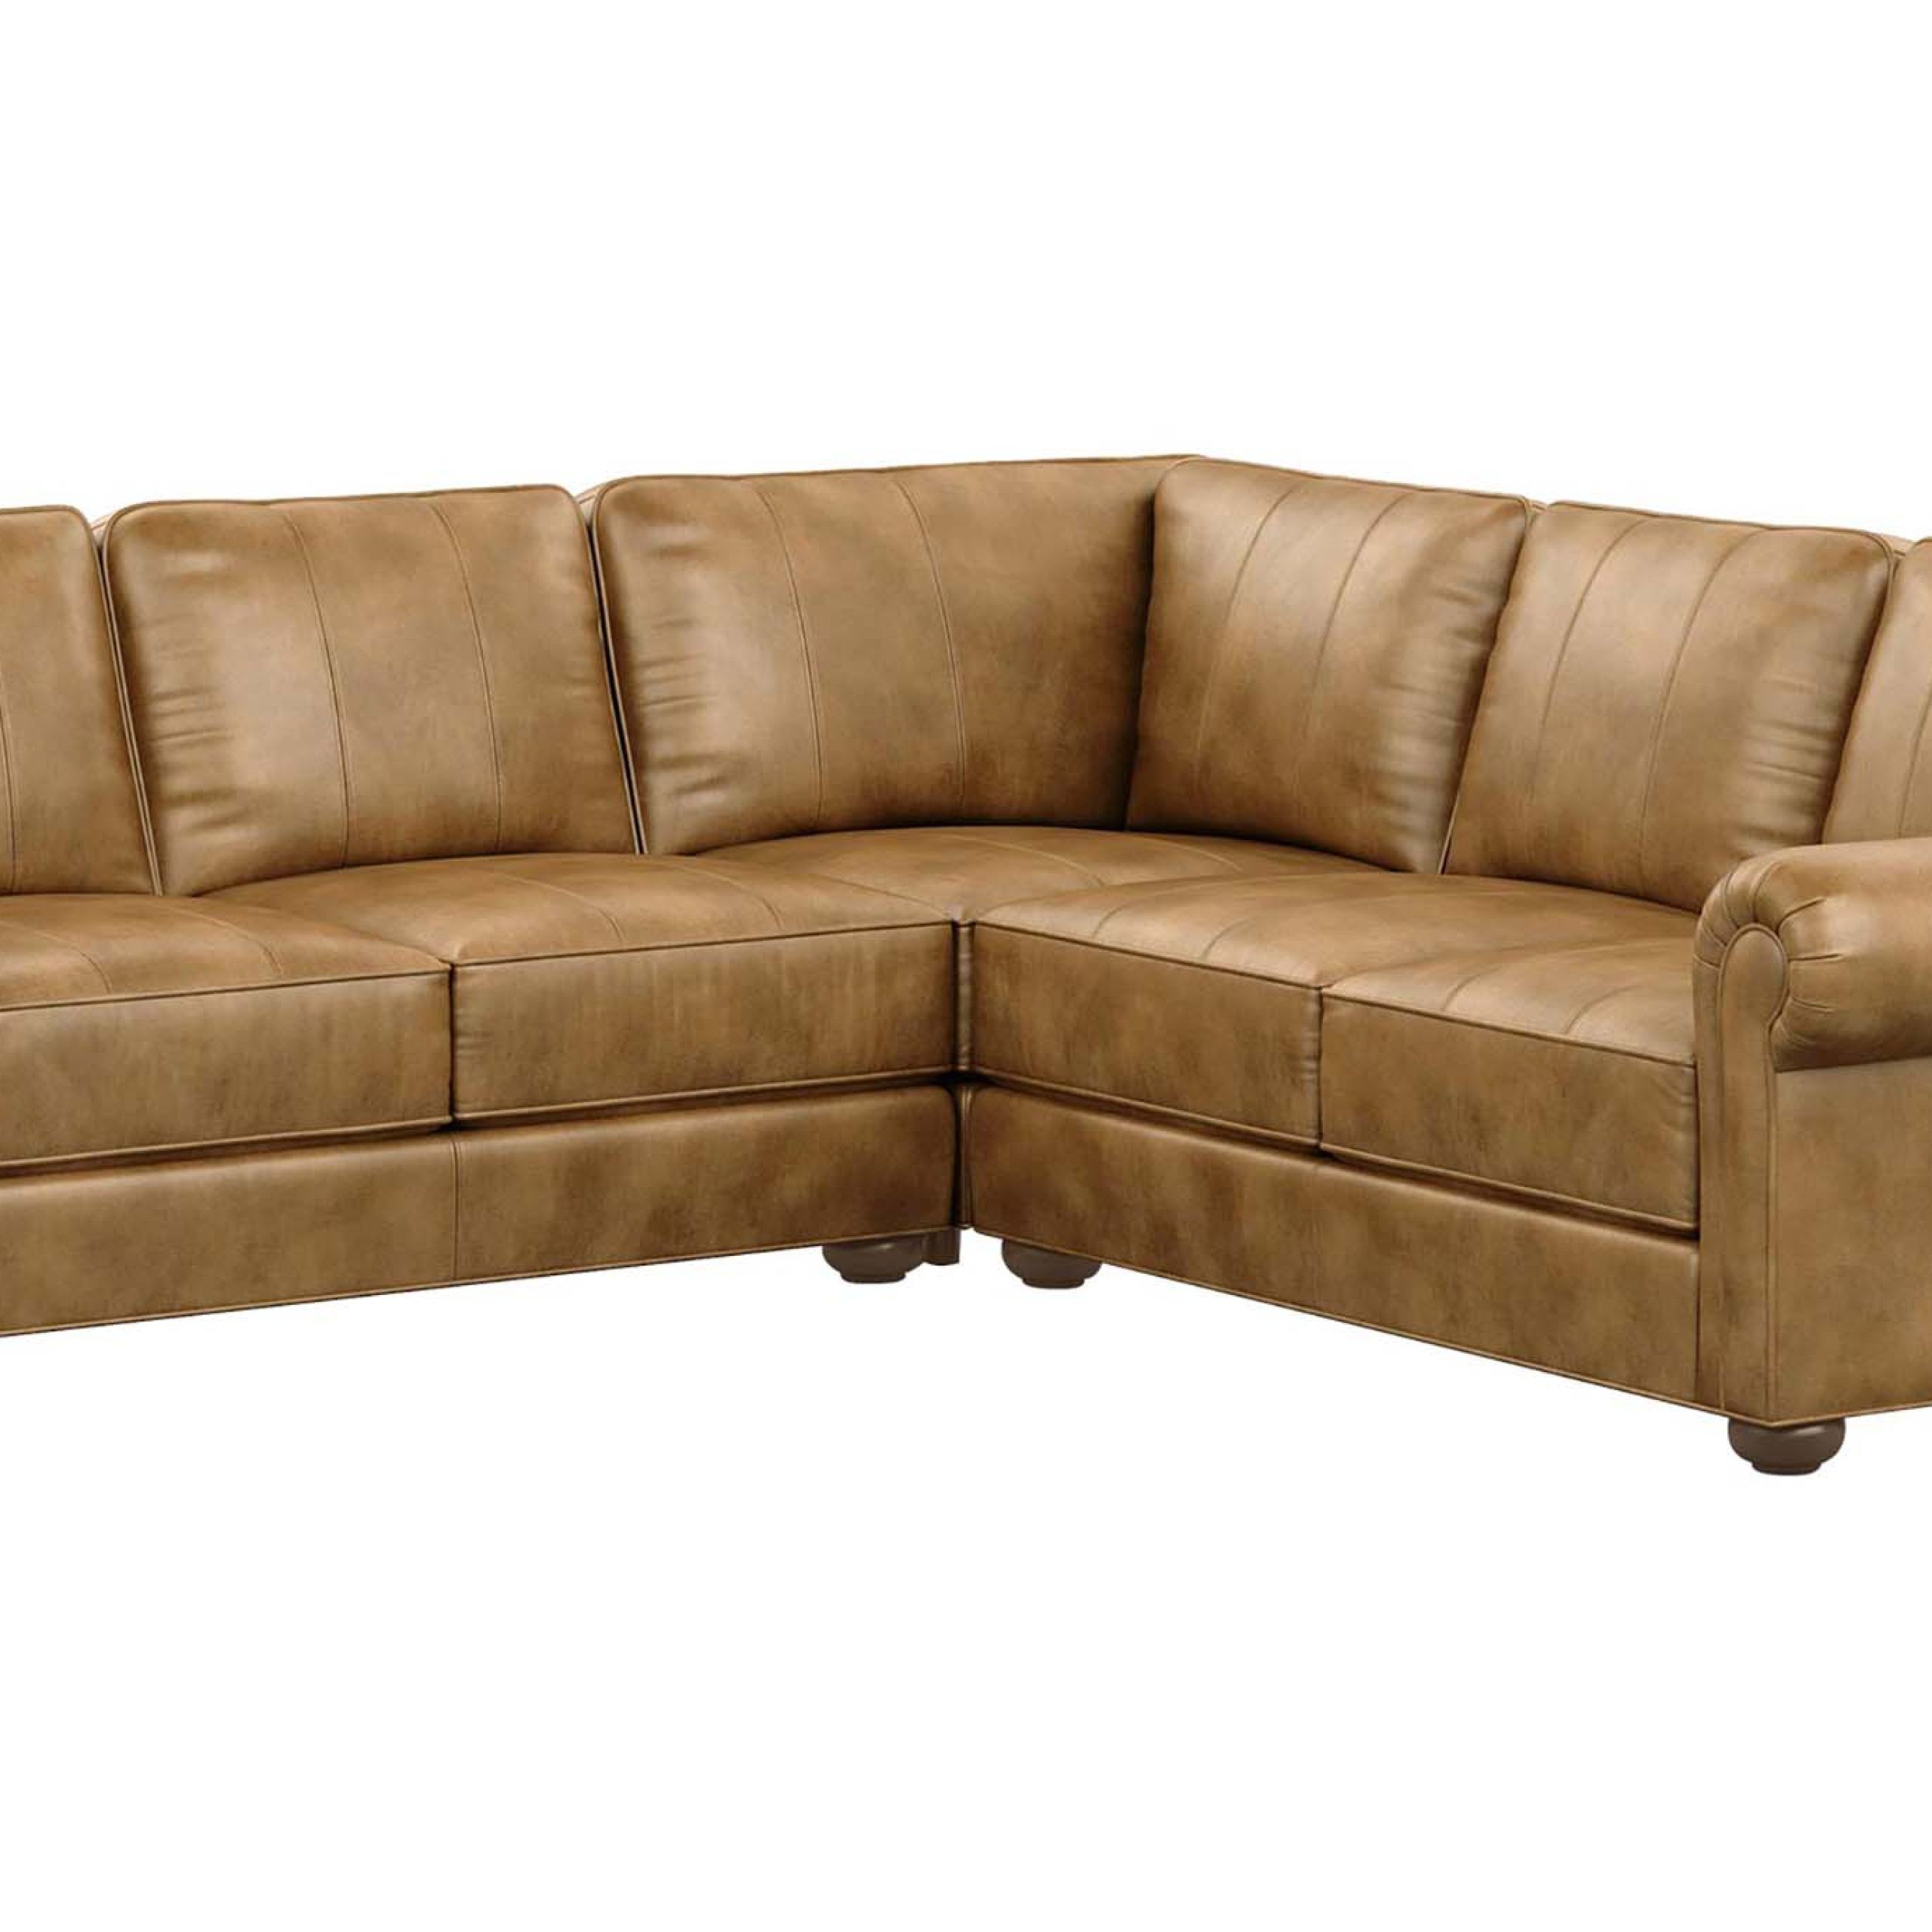 Richmond Three Piece Leather Sectional | Ethan Allen Throughout 3 Piece Leather Sectional Sofa Sets (Gallery 11 of 20)